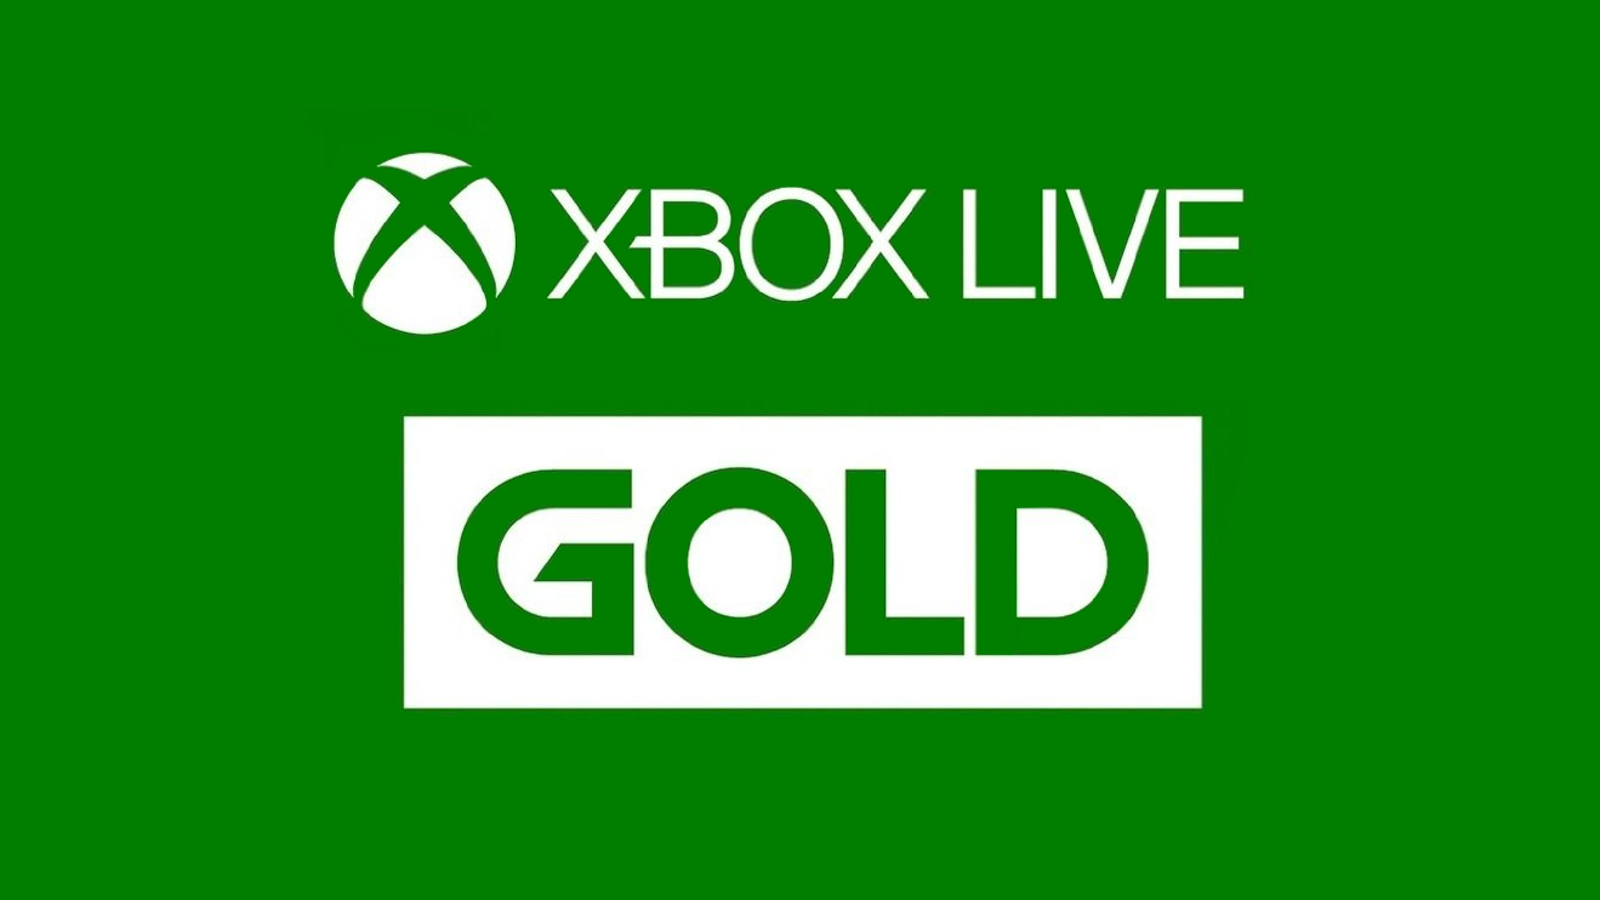 Live Gold is no play free-to-play titles online | VG247